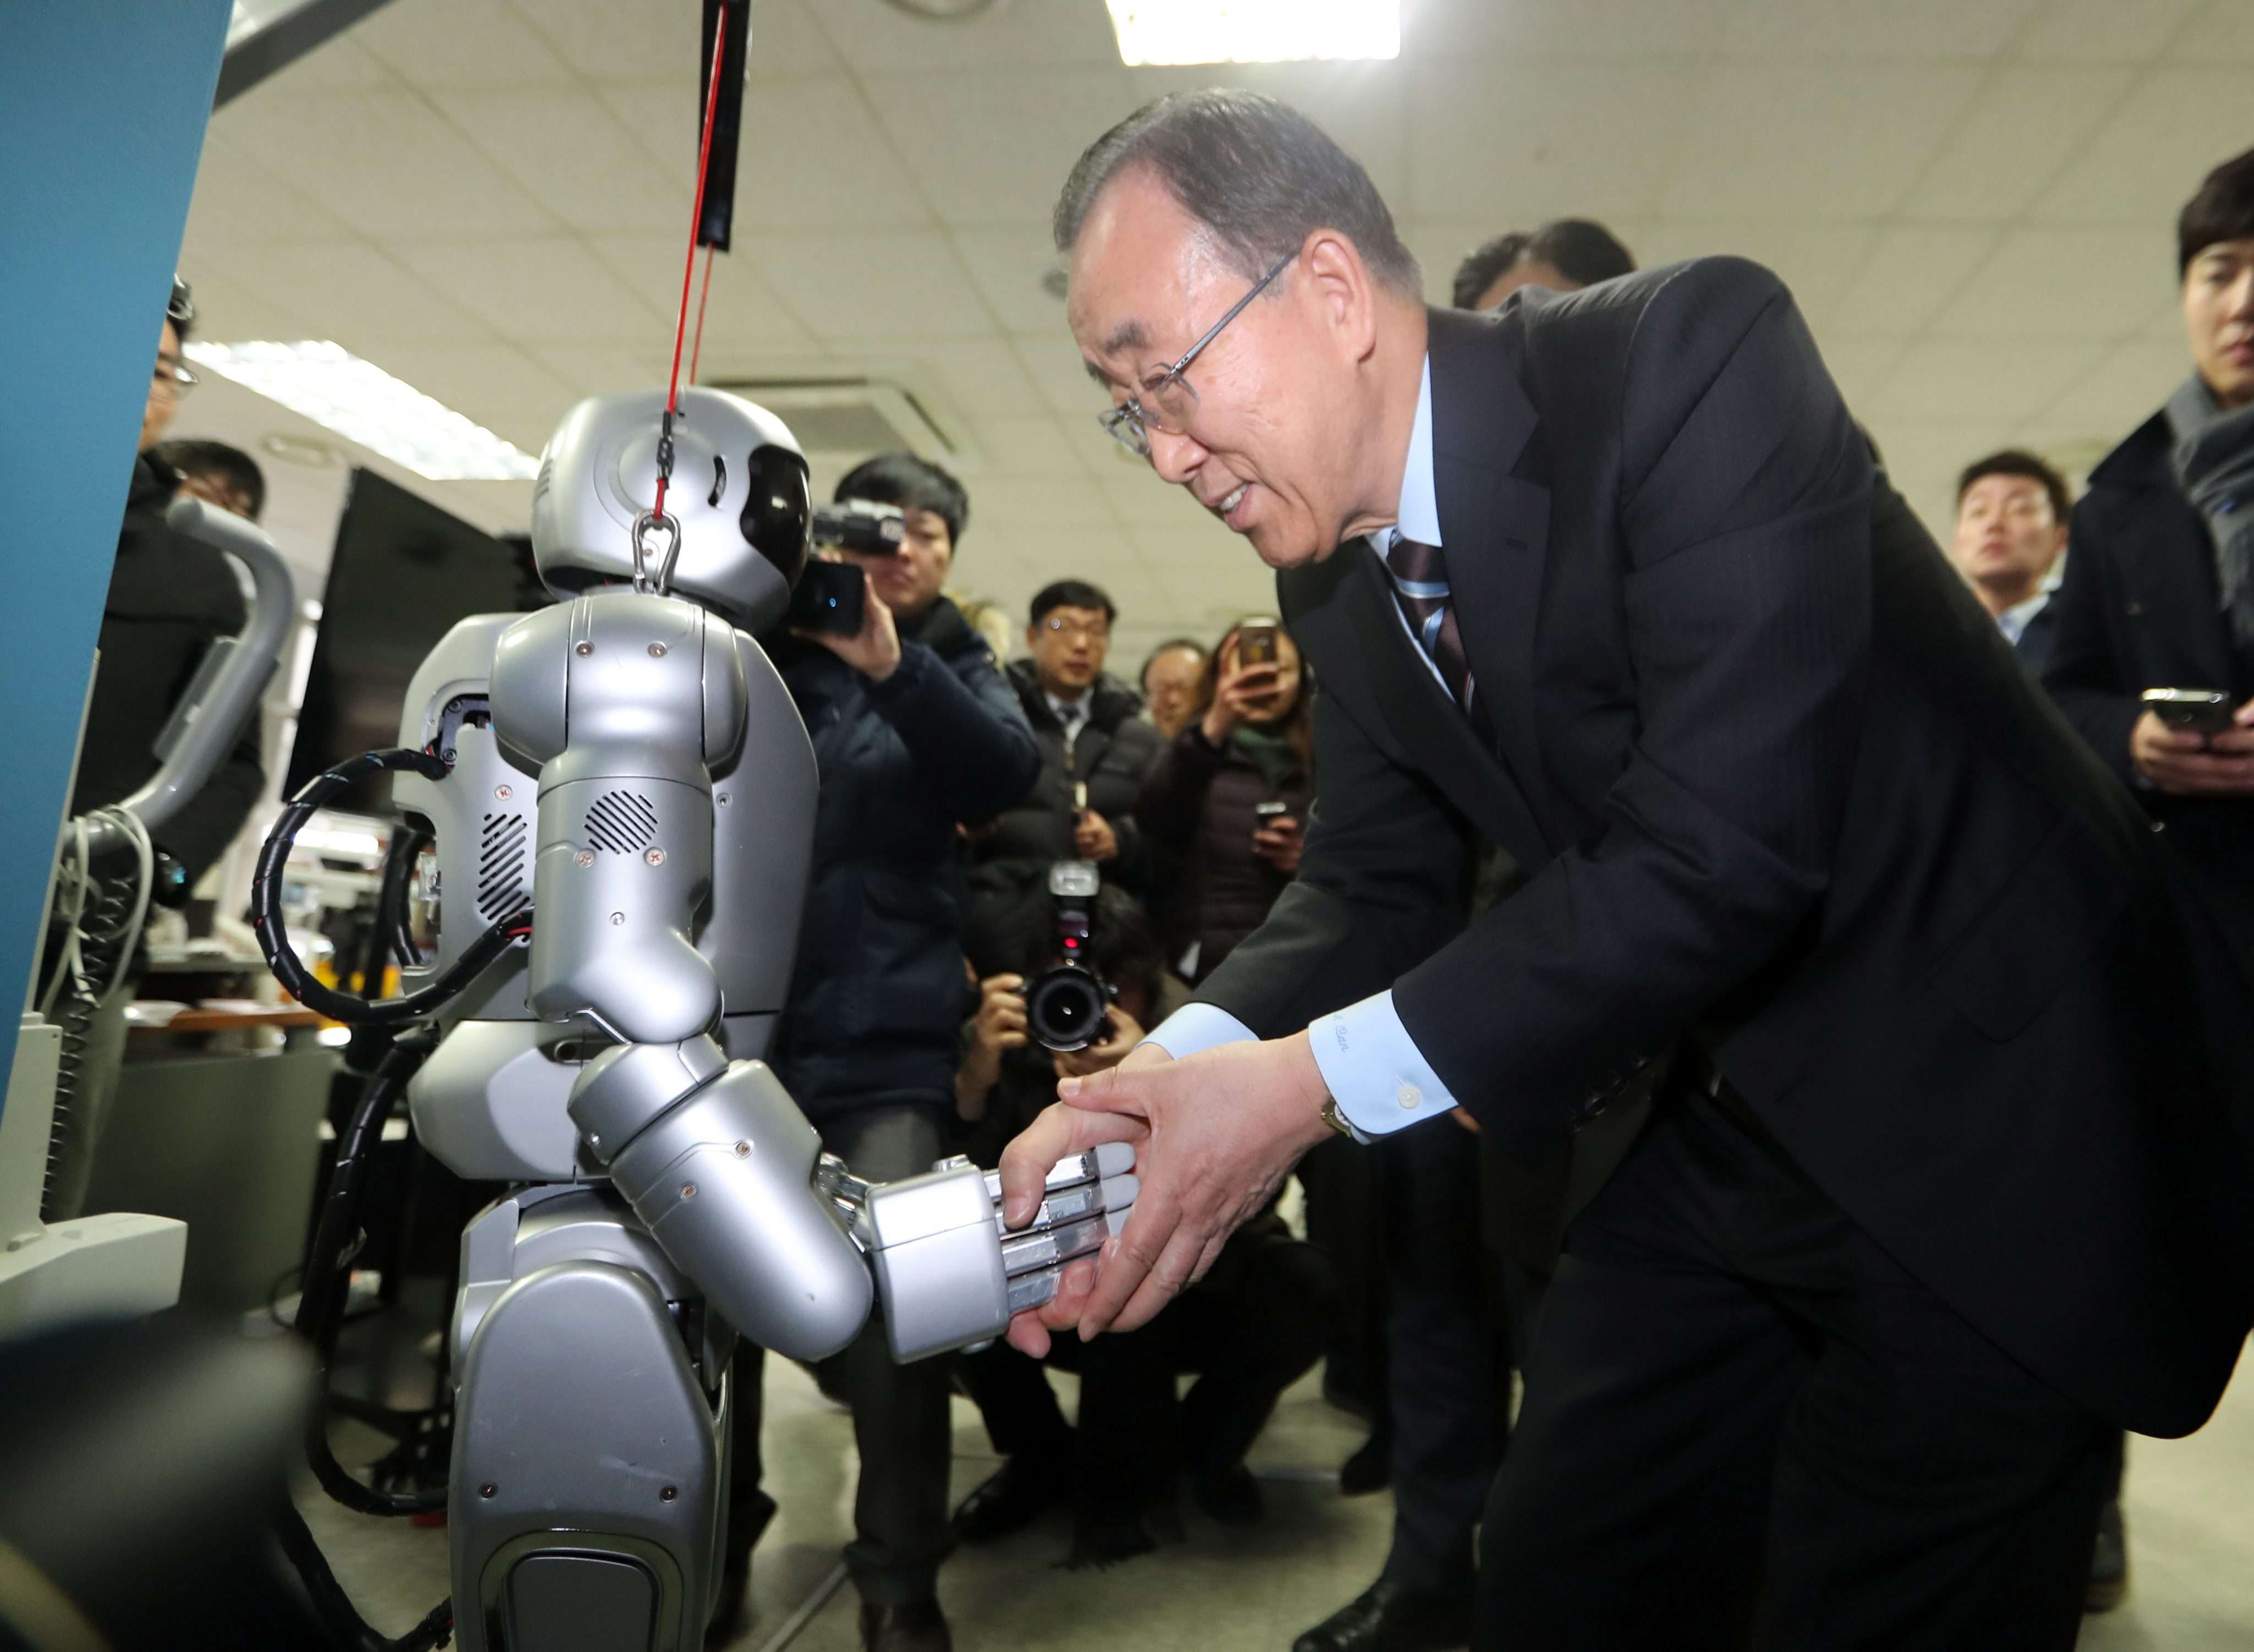 Former UN secretary general Ban Ki-moon shakes hands with Hubo, a humanoid robot, during his visit to the Korea Advanced Institute of Science and Technology. Photo: EPA